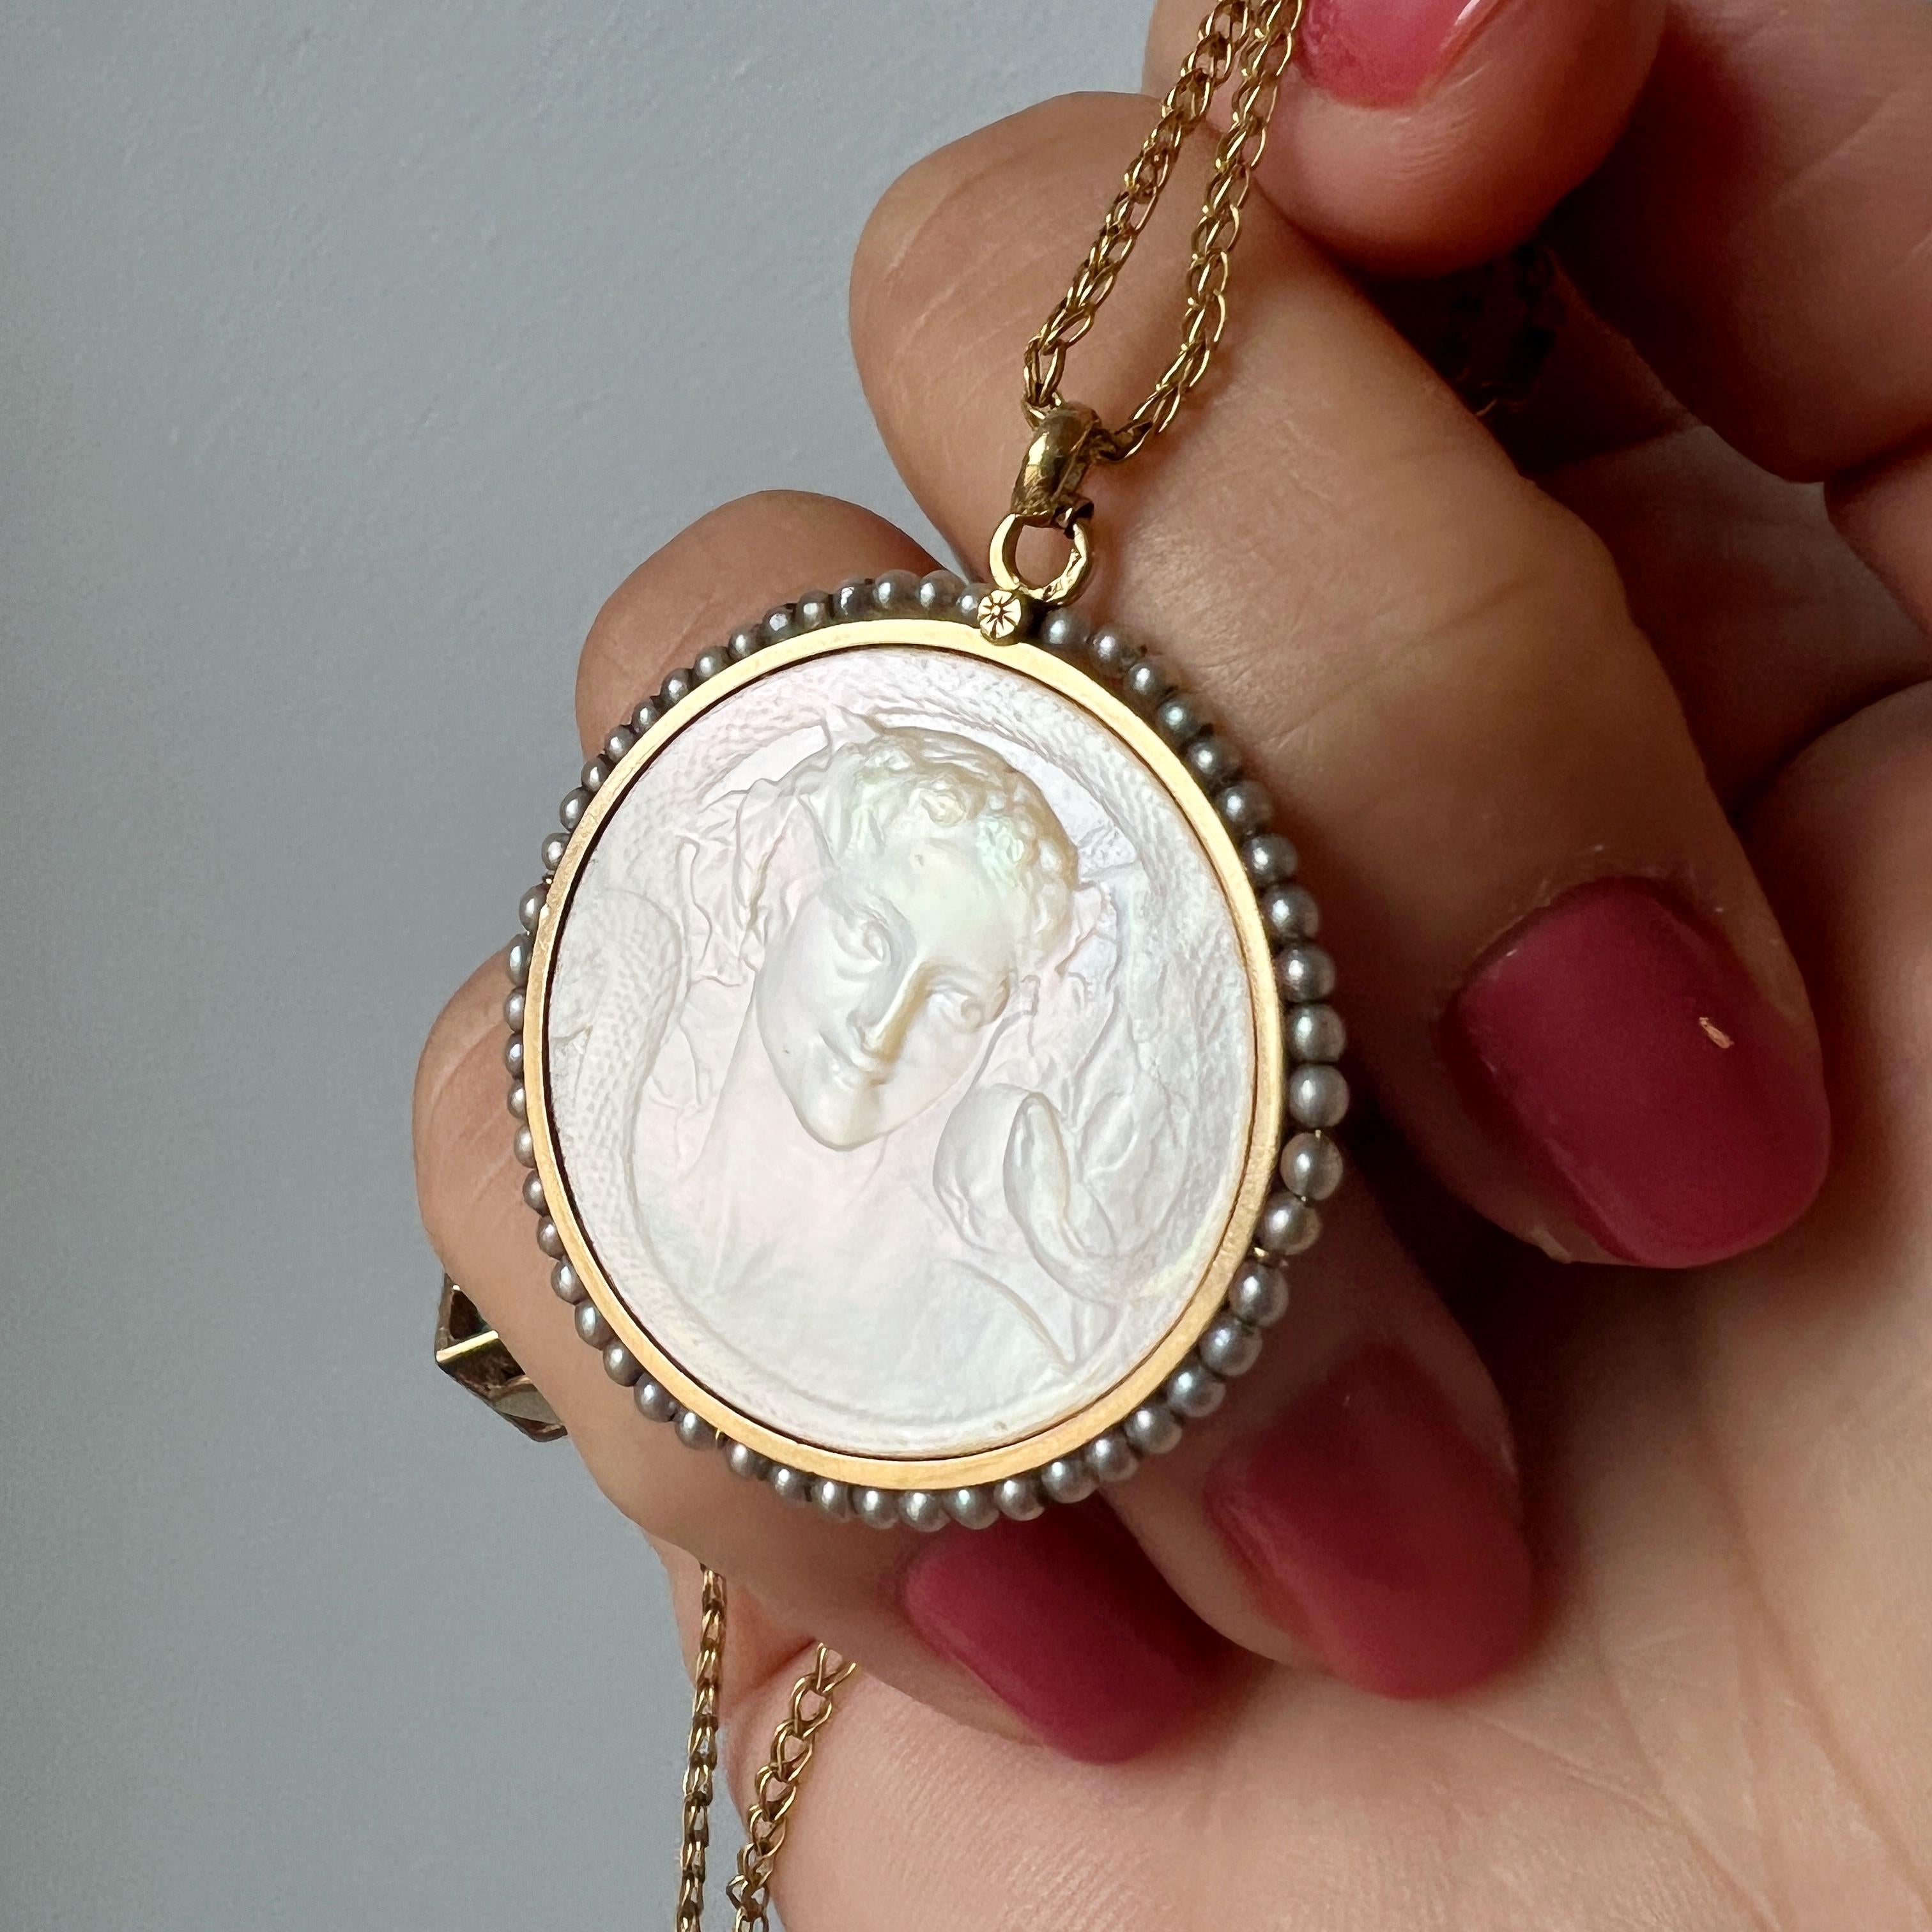 Discover the allure of a bygone era with this exquisite 18K gold pendant medal from the Art Nouveau era.

At the heart of this pendant is a young lady, surrounded by a snake, showing a mysterious connection between the humanity and the natural